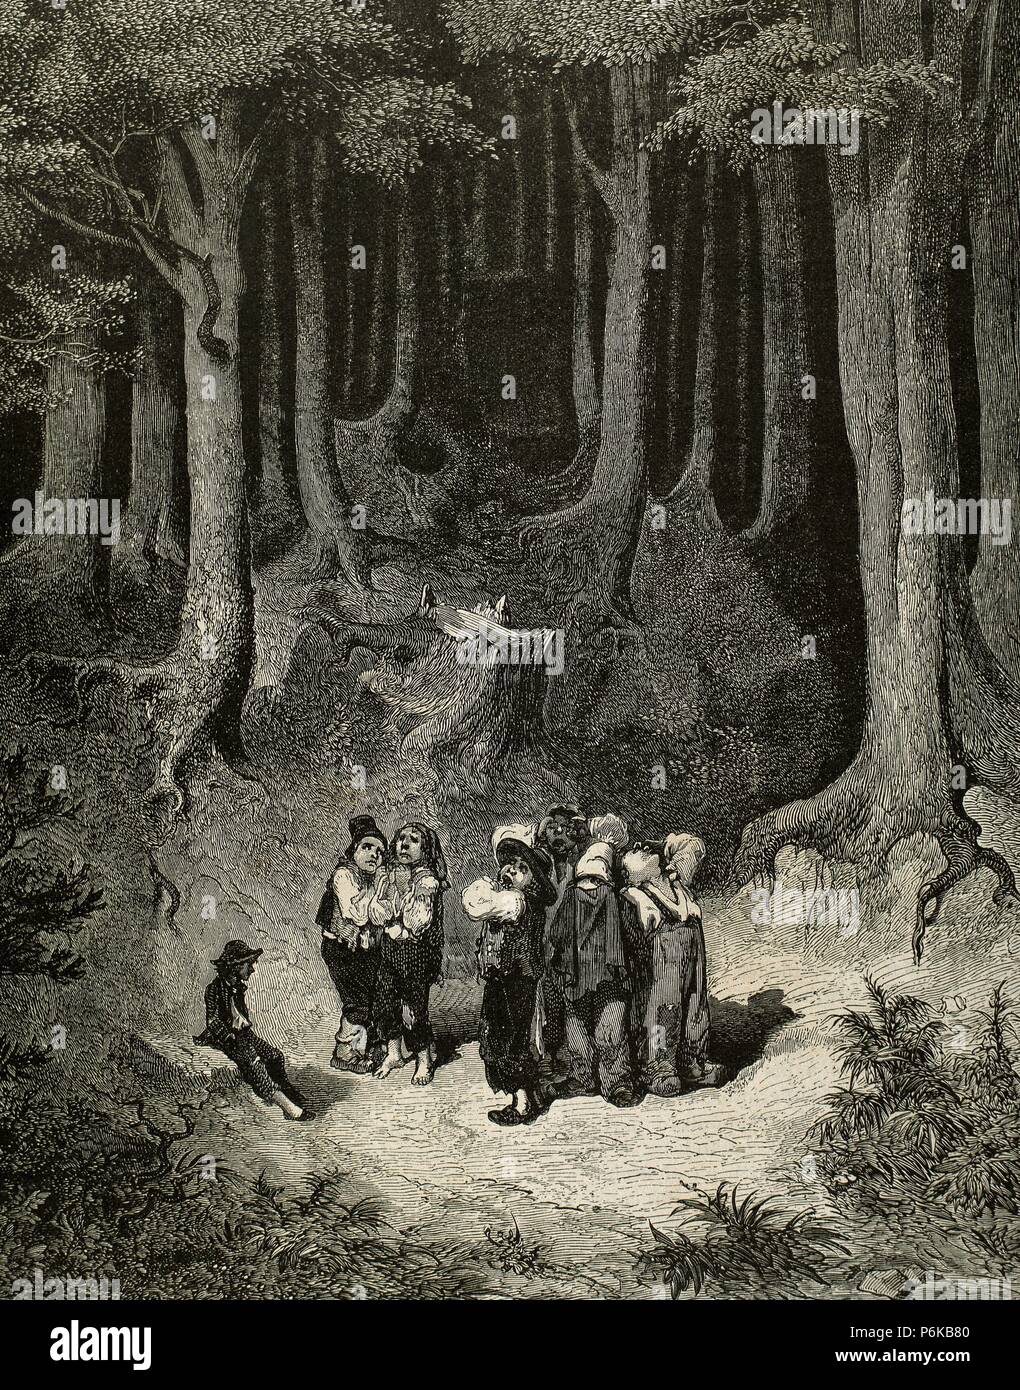 Charles Perrault (1628-1703). French writer. Hop-o'-My-Thumb. The children realize that they are lost in the forest. Engraving by Gustave Dore. Stock Photo